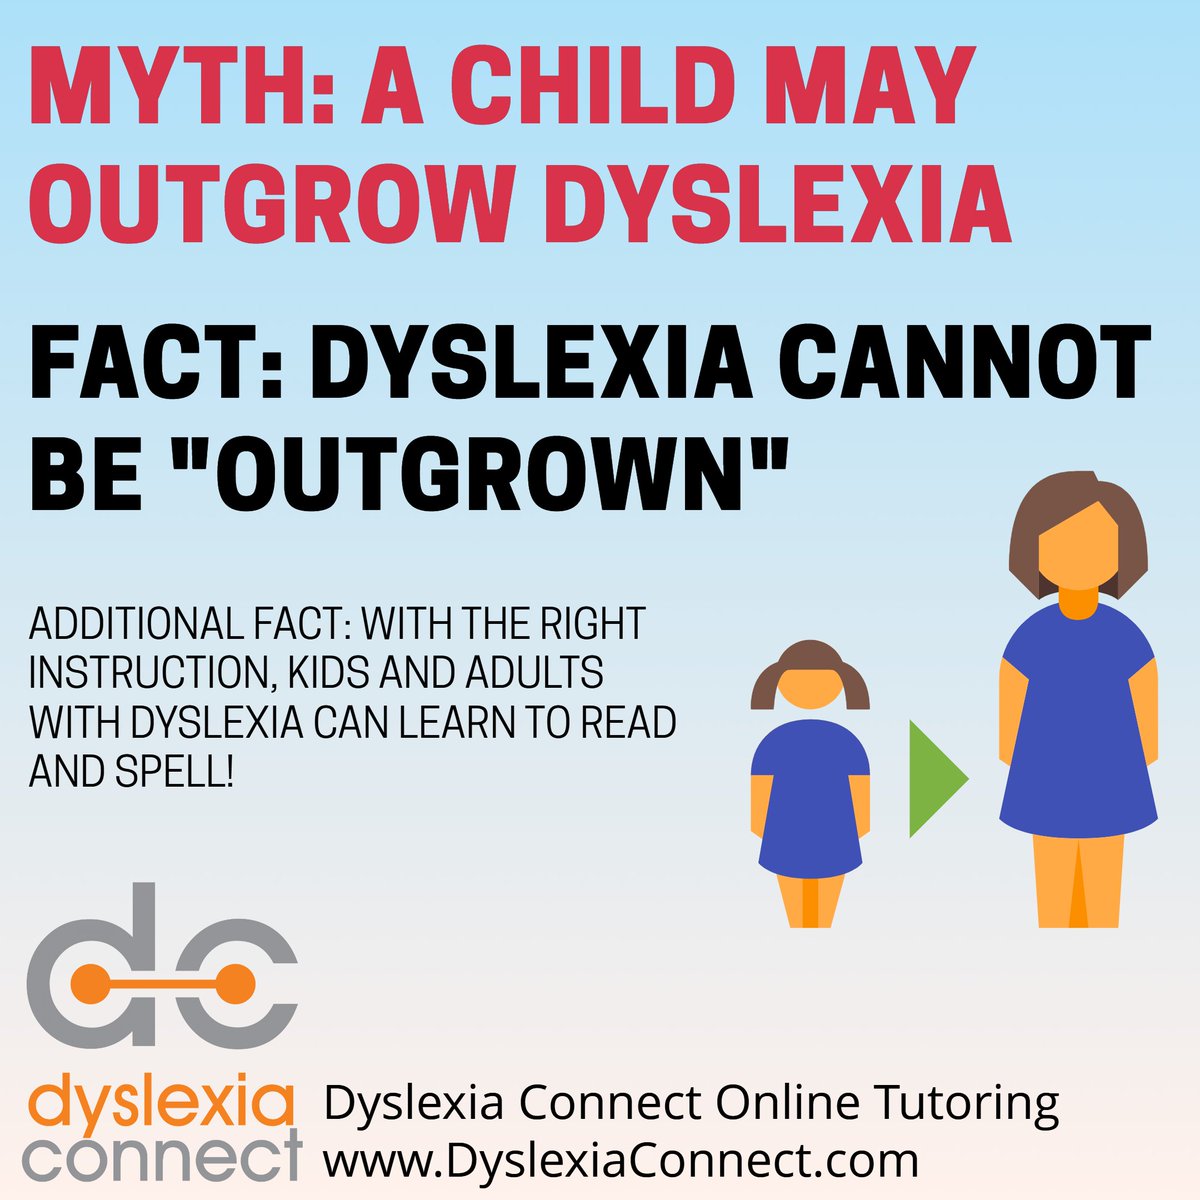 A common myth about dyslexia is that a child can outgrow it. This is not the case. However, with the proper type of instruction, a child or adult with dyslexia can learn to read and spell confidently! DyslexiaConnect.com #dyslexia #ADHD #dysgraphia